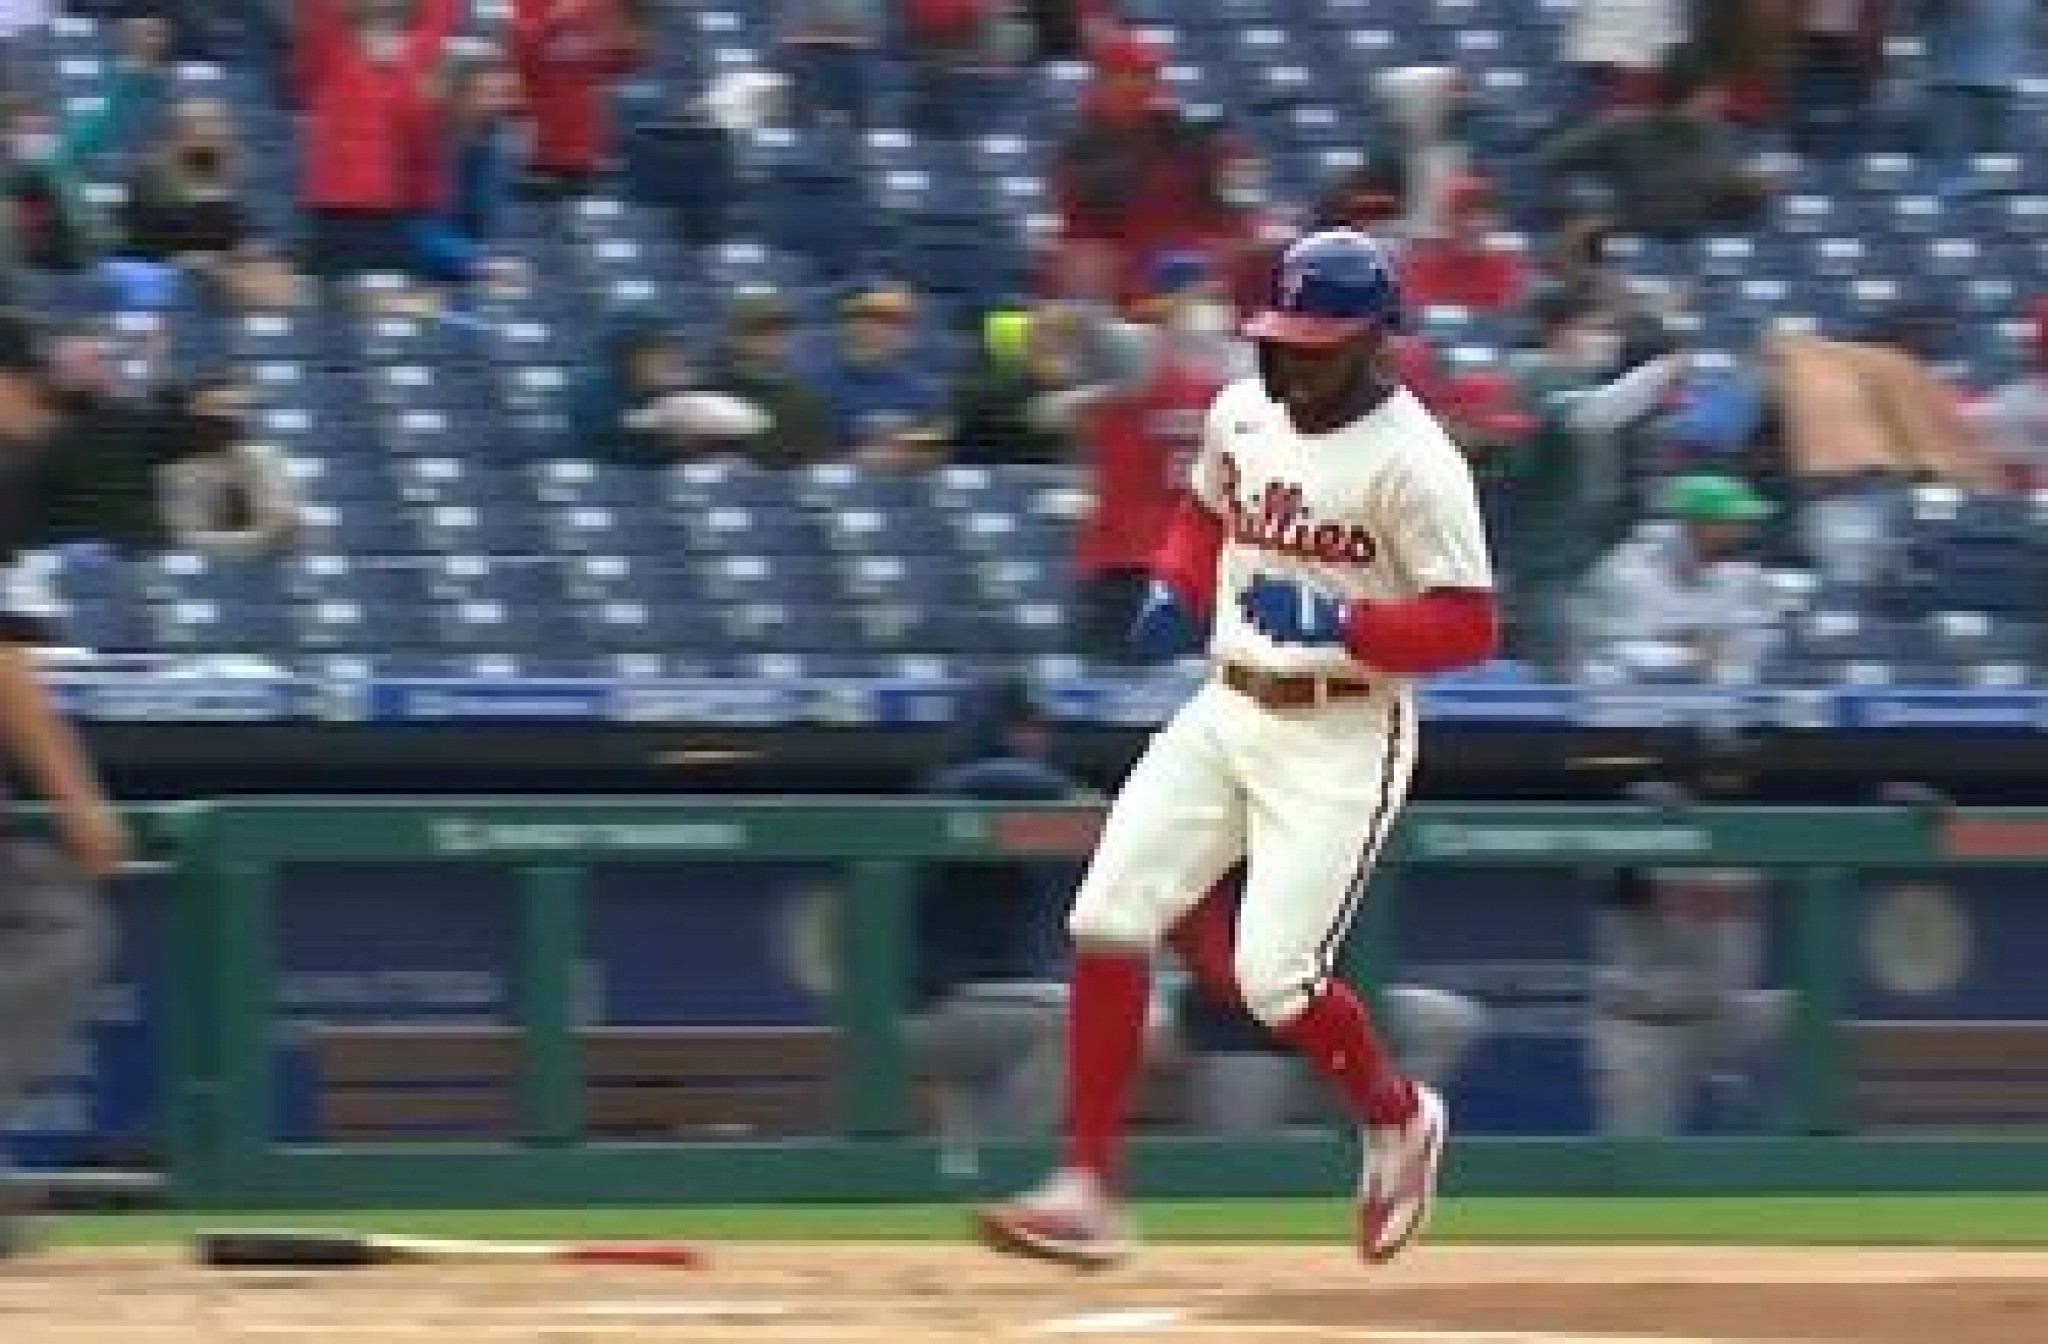 Phillies explode for three two-out runs to take 3-0 lead over Braves in the fifth inning